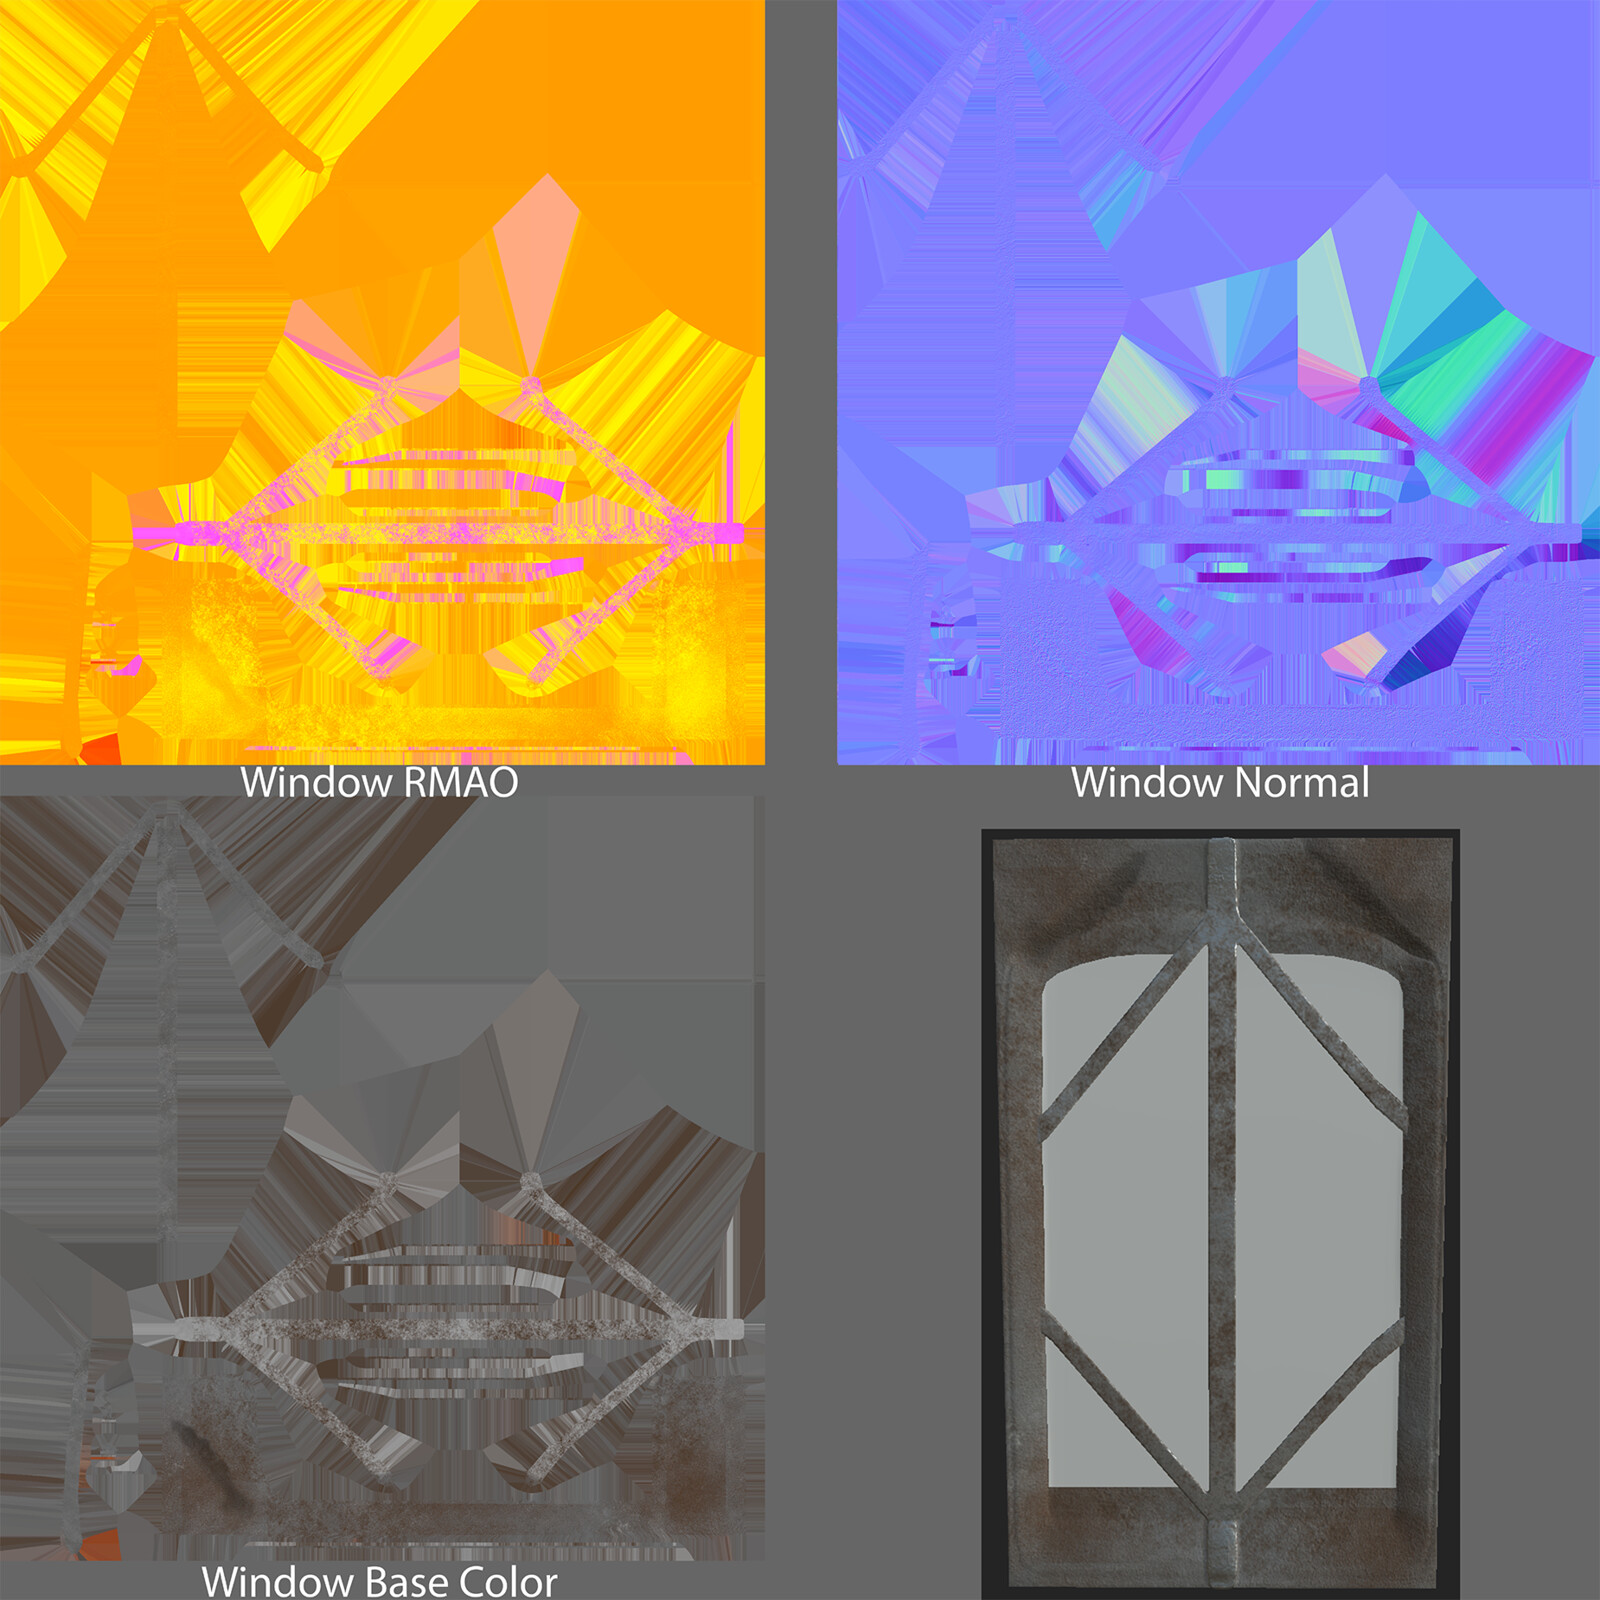 Window Frame Texture Flats (The glass was done in Unreal's material editor)